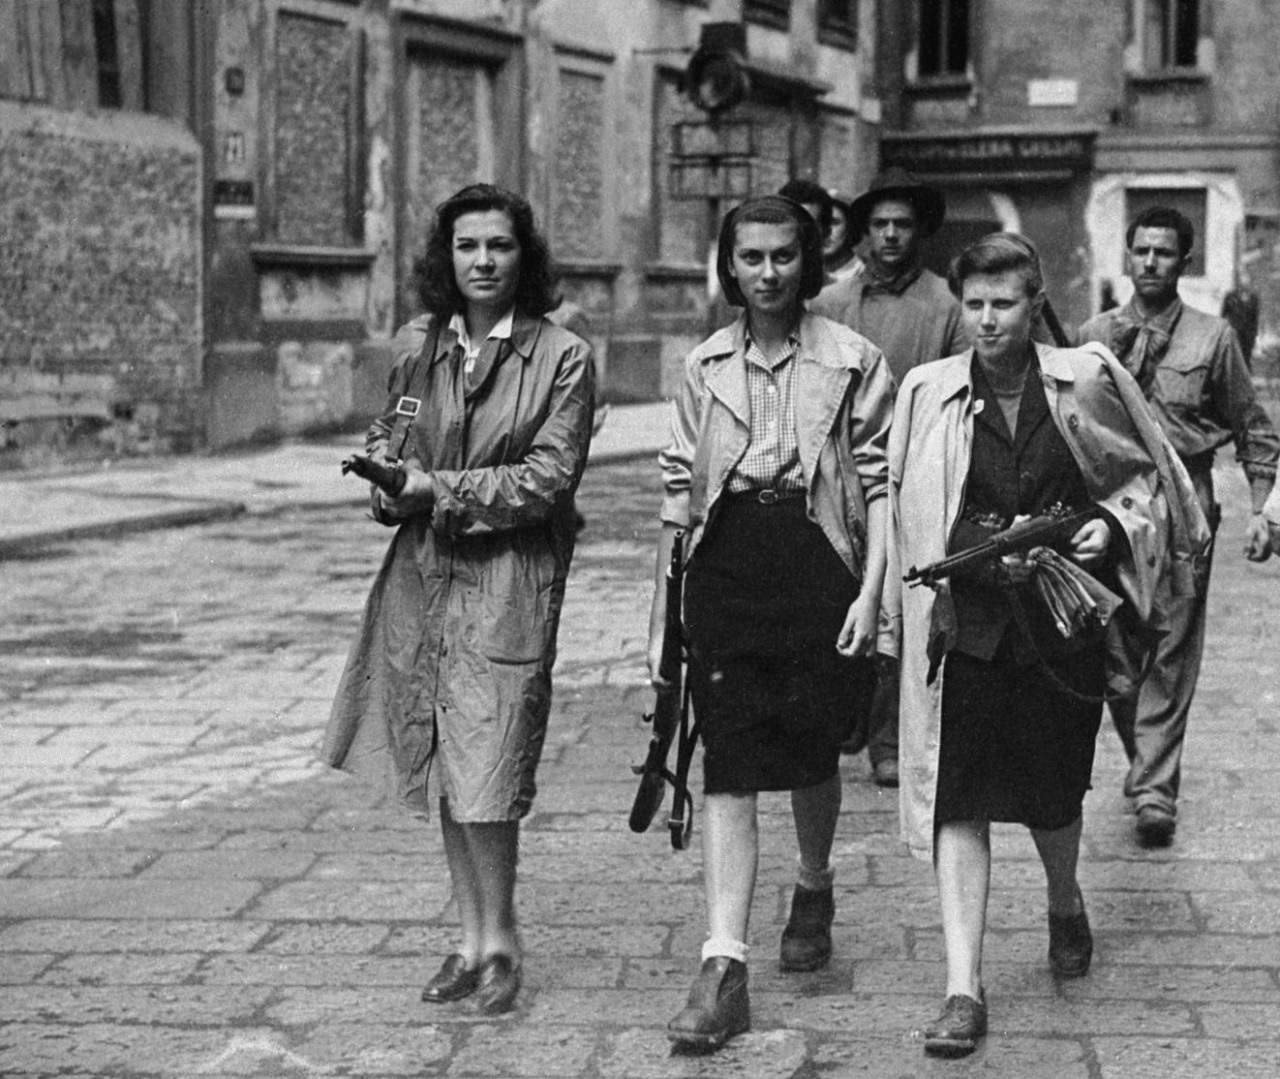 WWII — Women of the Italian resistance (Milan, Italy - April 1945)